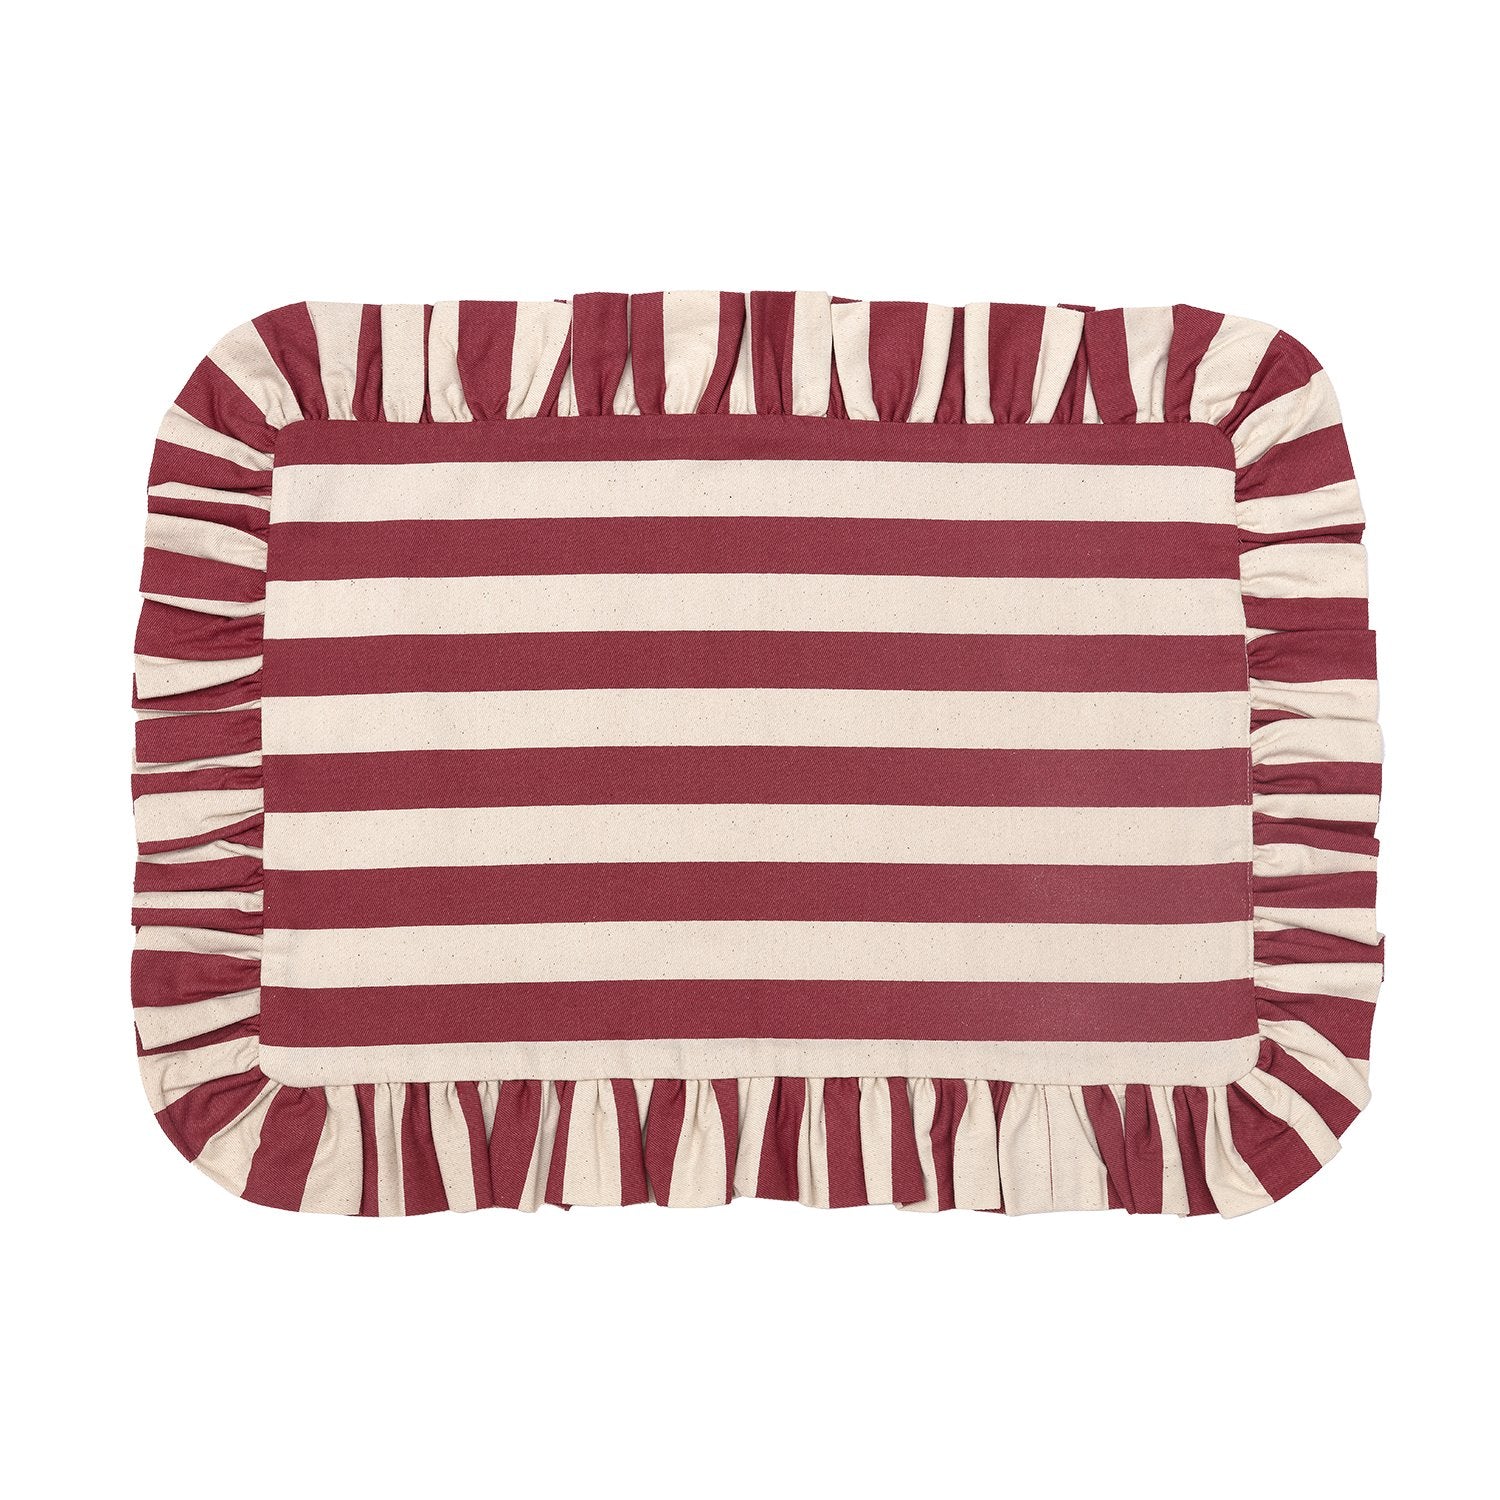 Tangier Red Stripe Frilly Placemat - Set of Two - Alice Palmer & Co